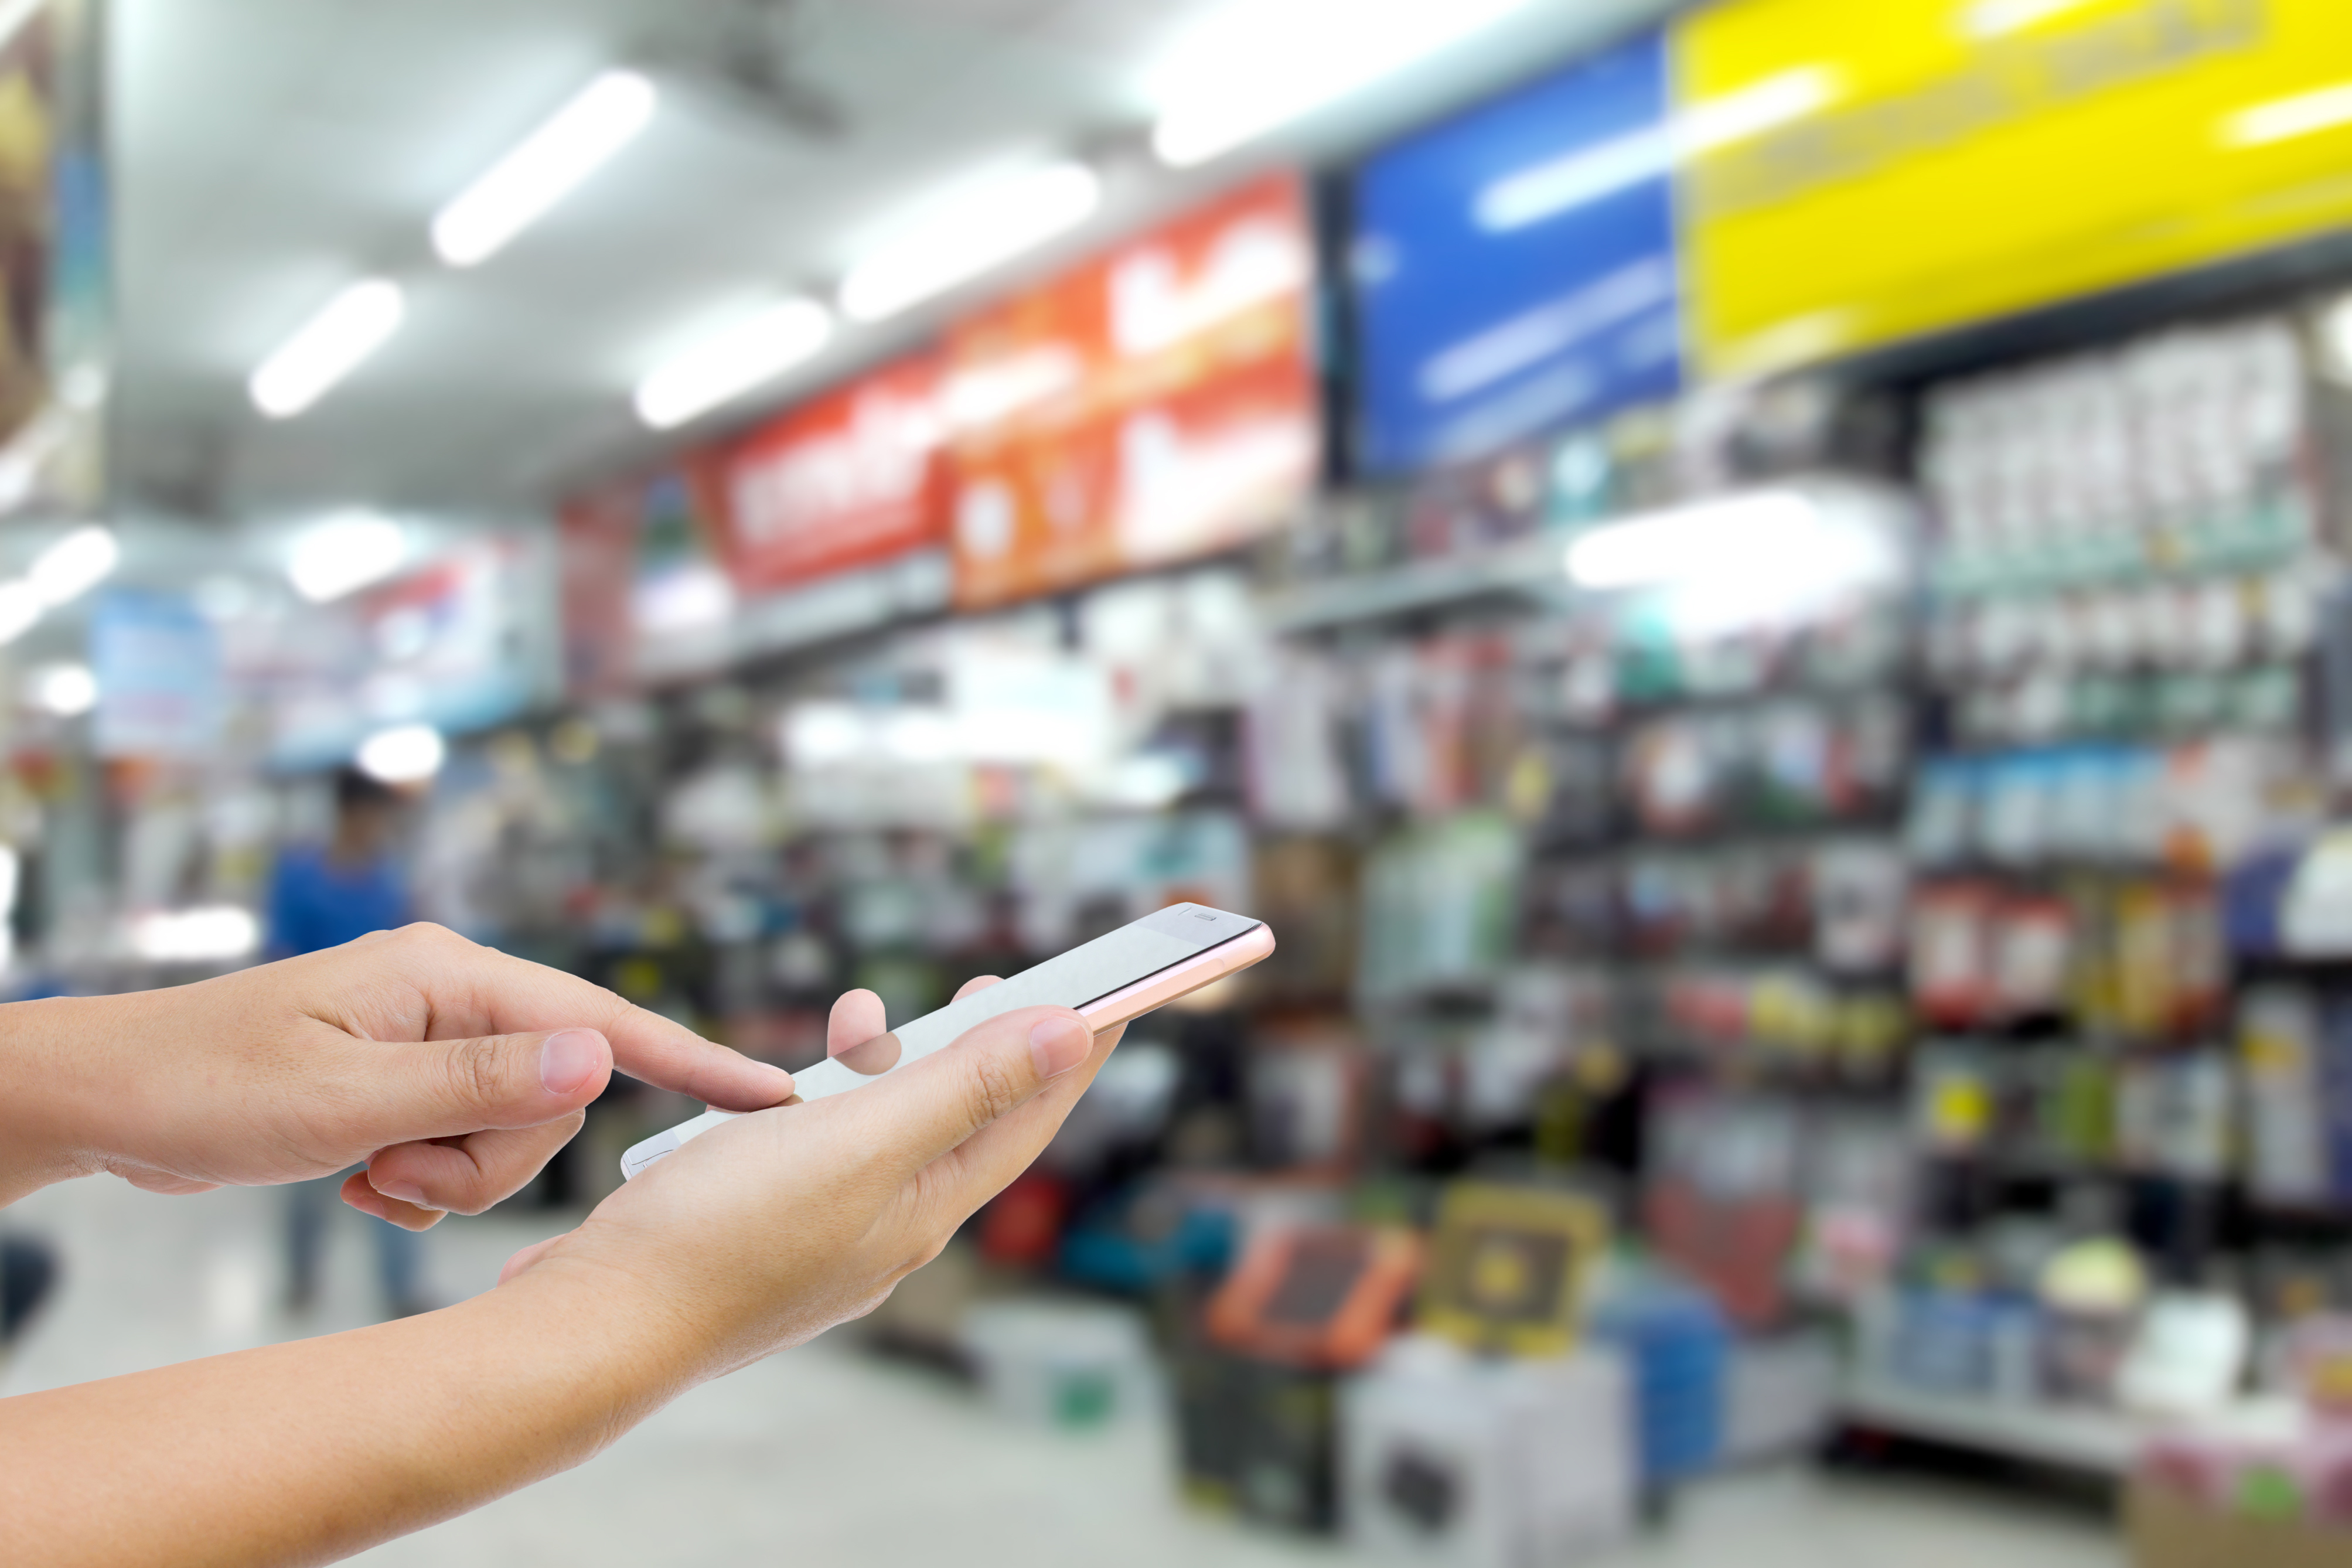 phygital reality trend using smartphone to help consumer shop inside retail store